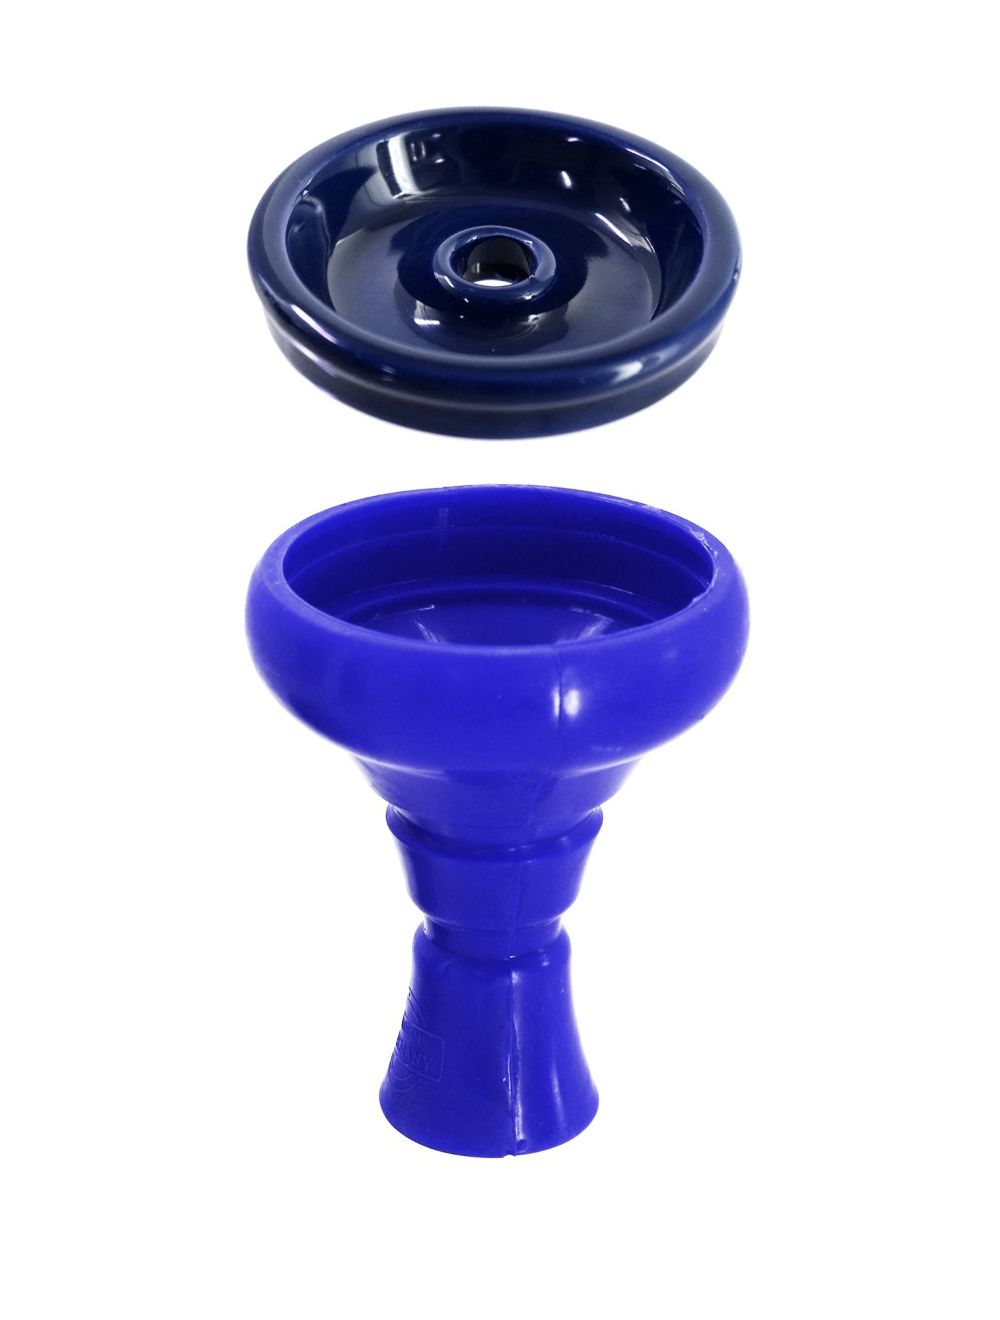 Silicone Tobacco Bowl with Funnel Insert Blue